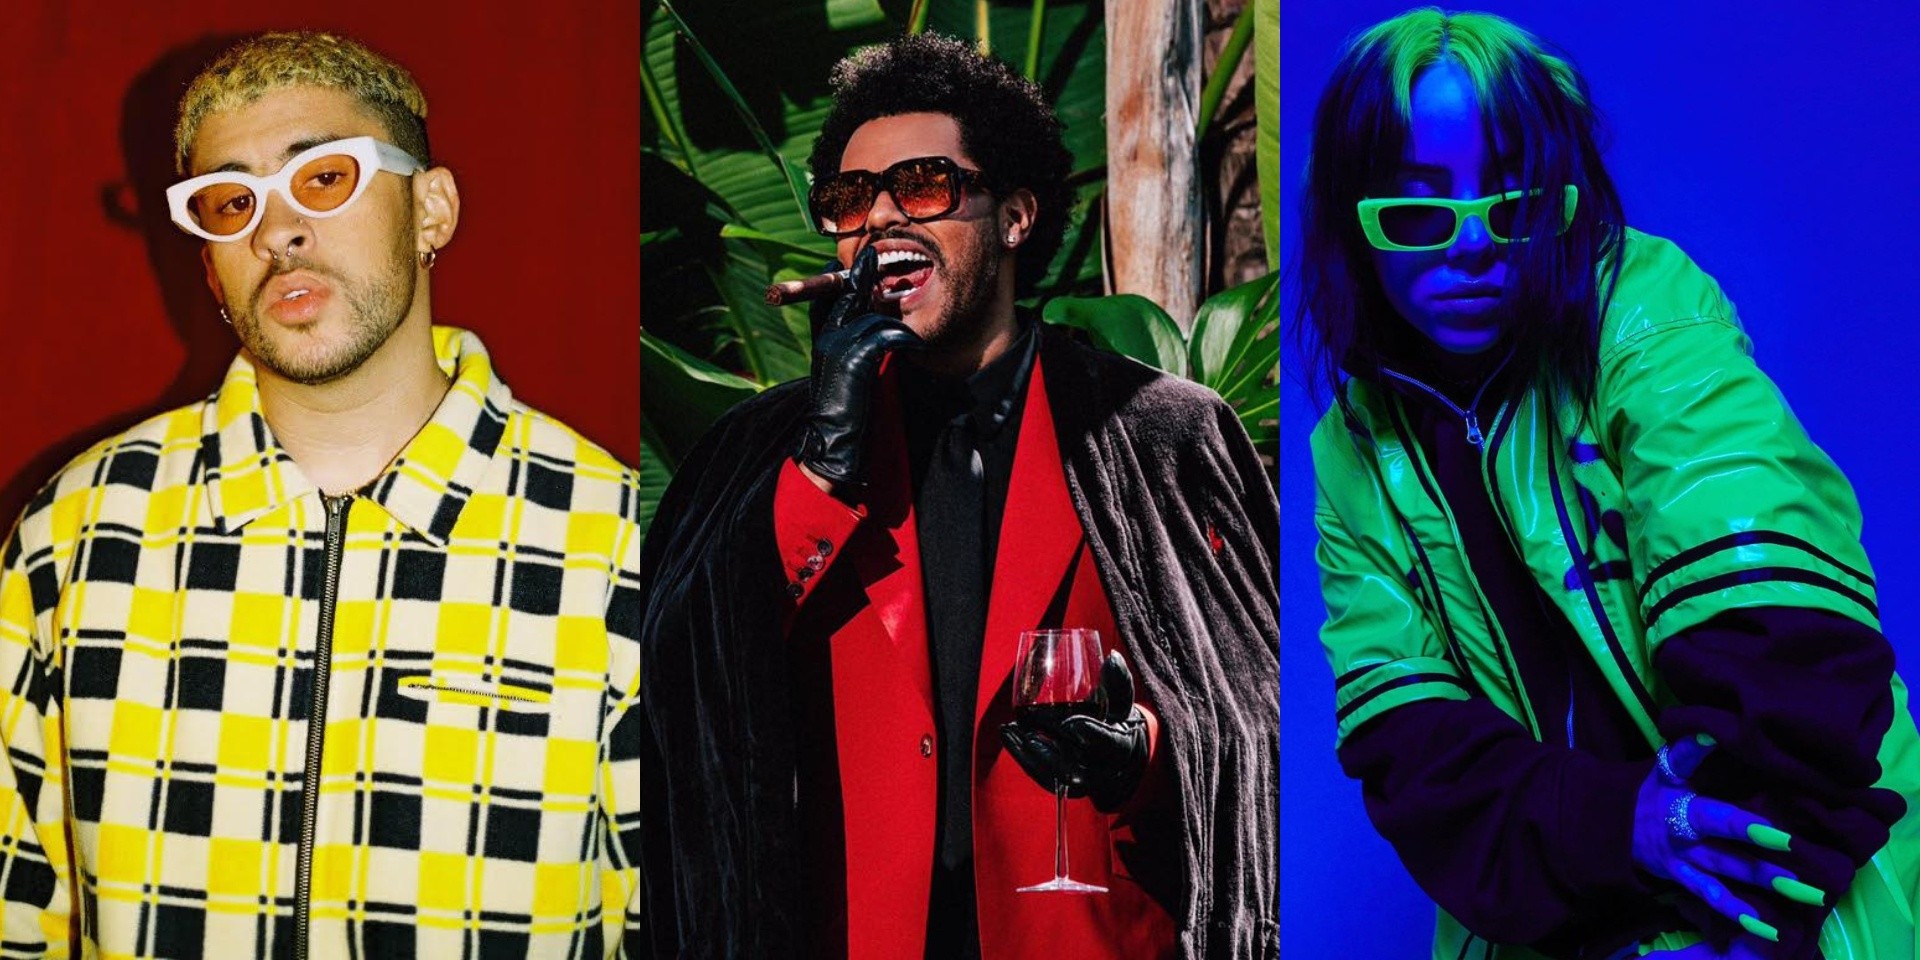 Spotify rolls out Wrapped 2020 with most streamed songs, albums, artists, and more, Bad Bunny, The Weeknd, Billie Eilish, and more come out on top